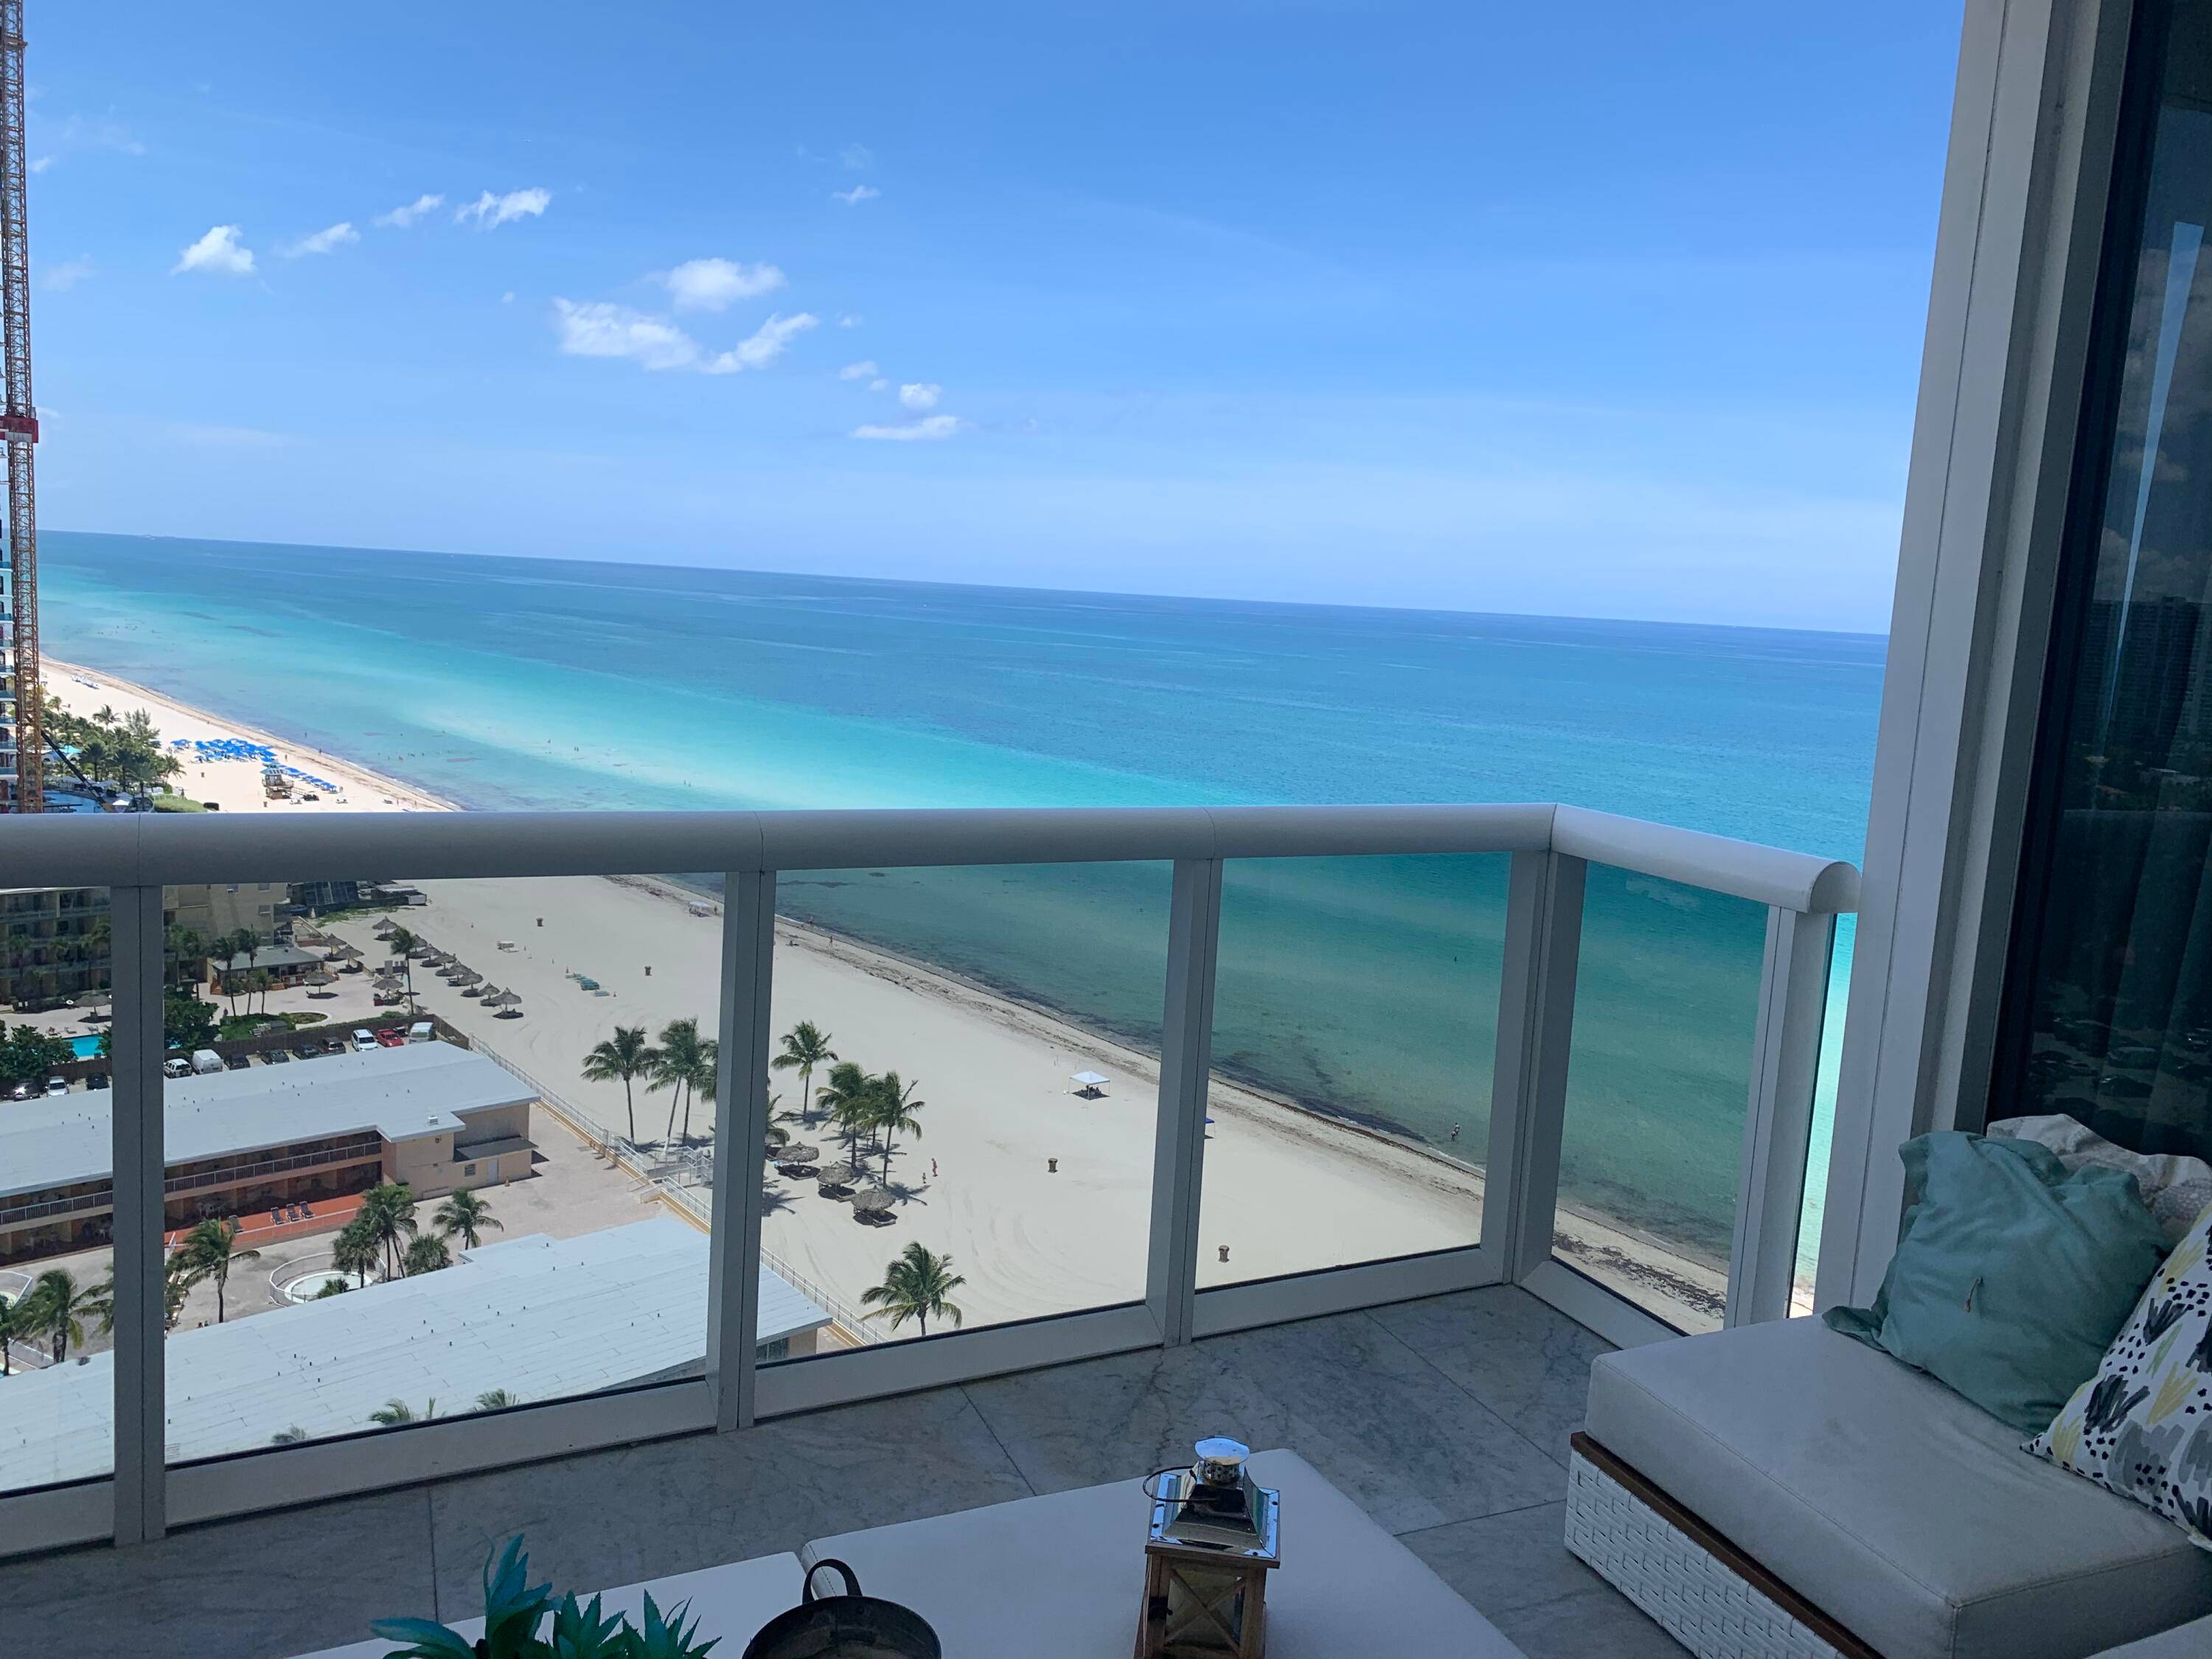 OUTSTANDING BEACH VIEW FROM EVERY ROOMS, VERY BIG 2 BEDROOMS 2.